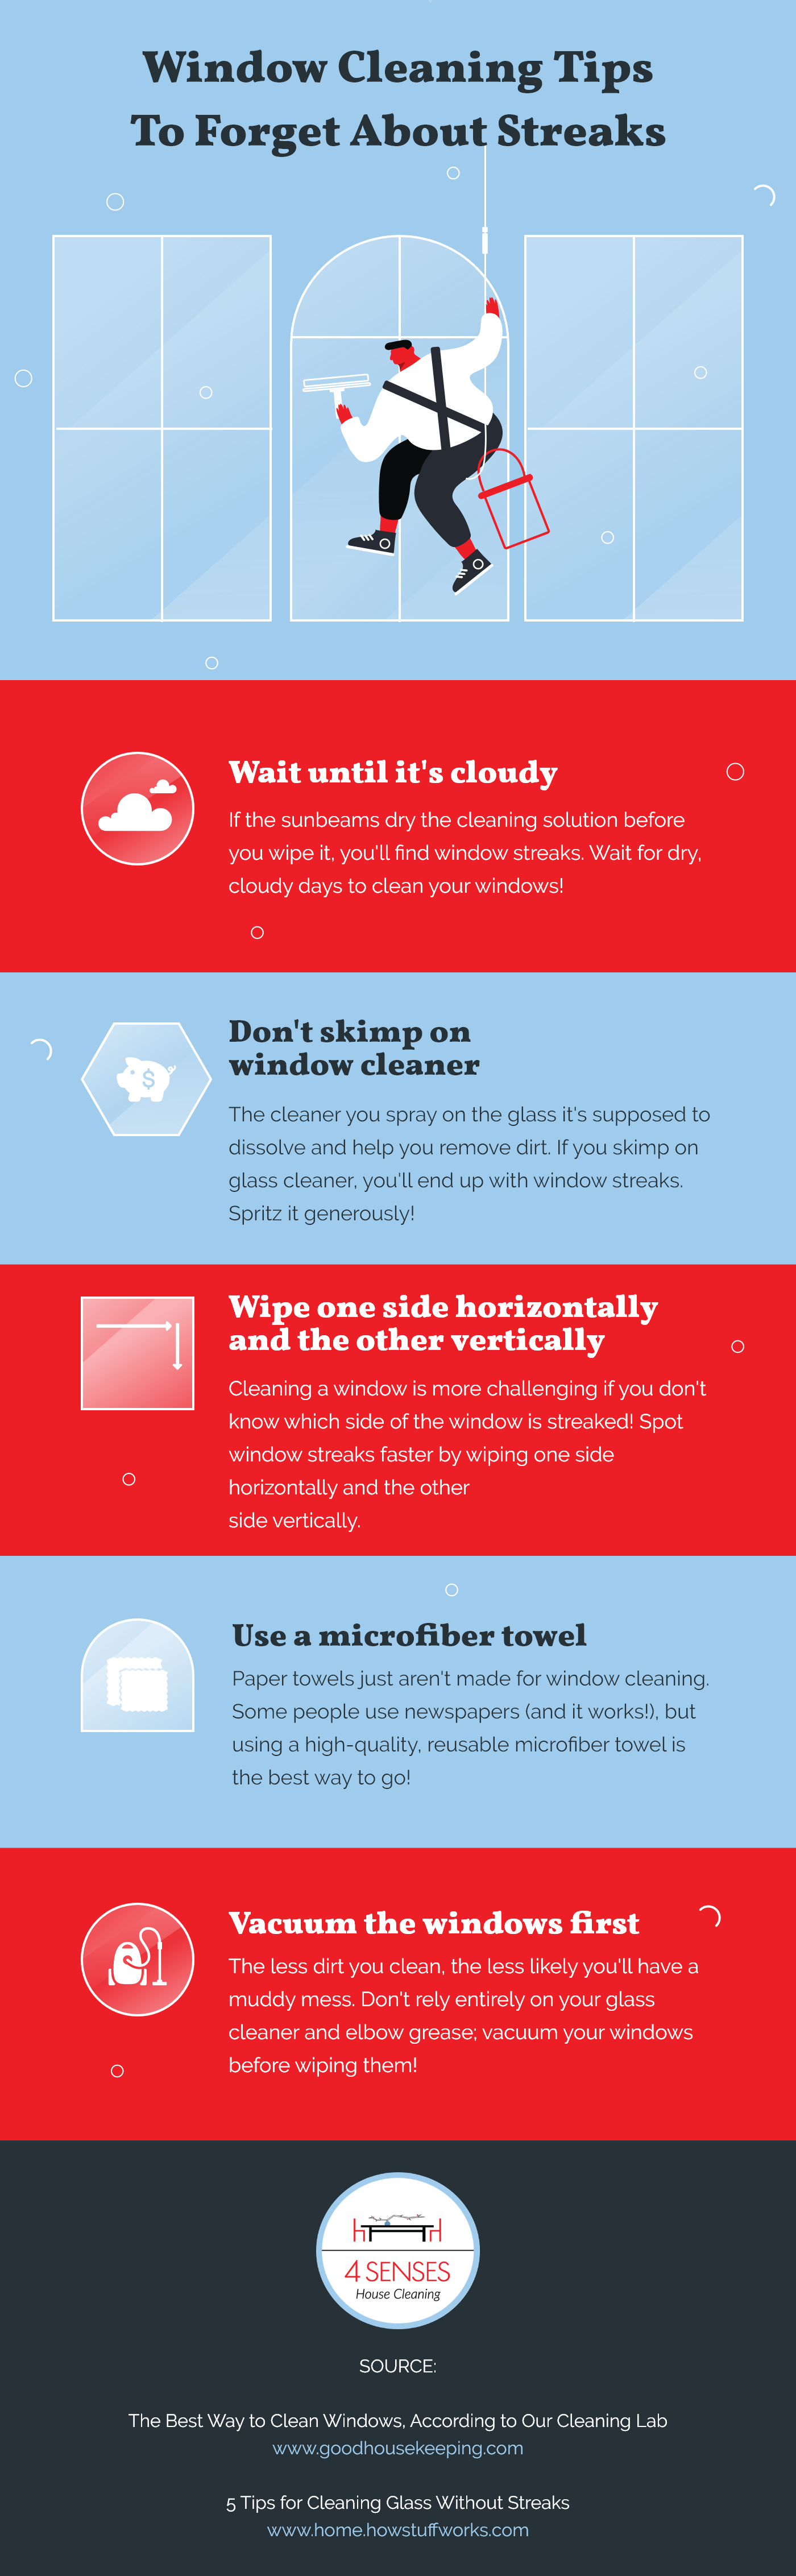 4 Senses House Cleaning - Window Cleaning Tips To Forget About Streaks